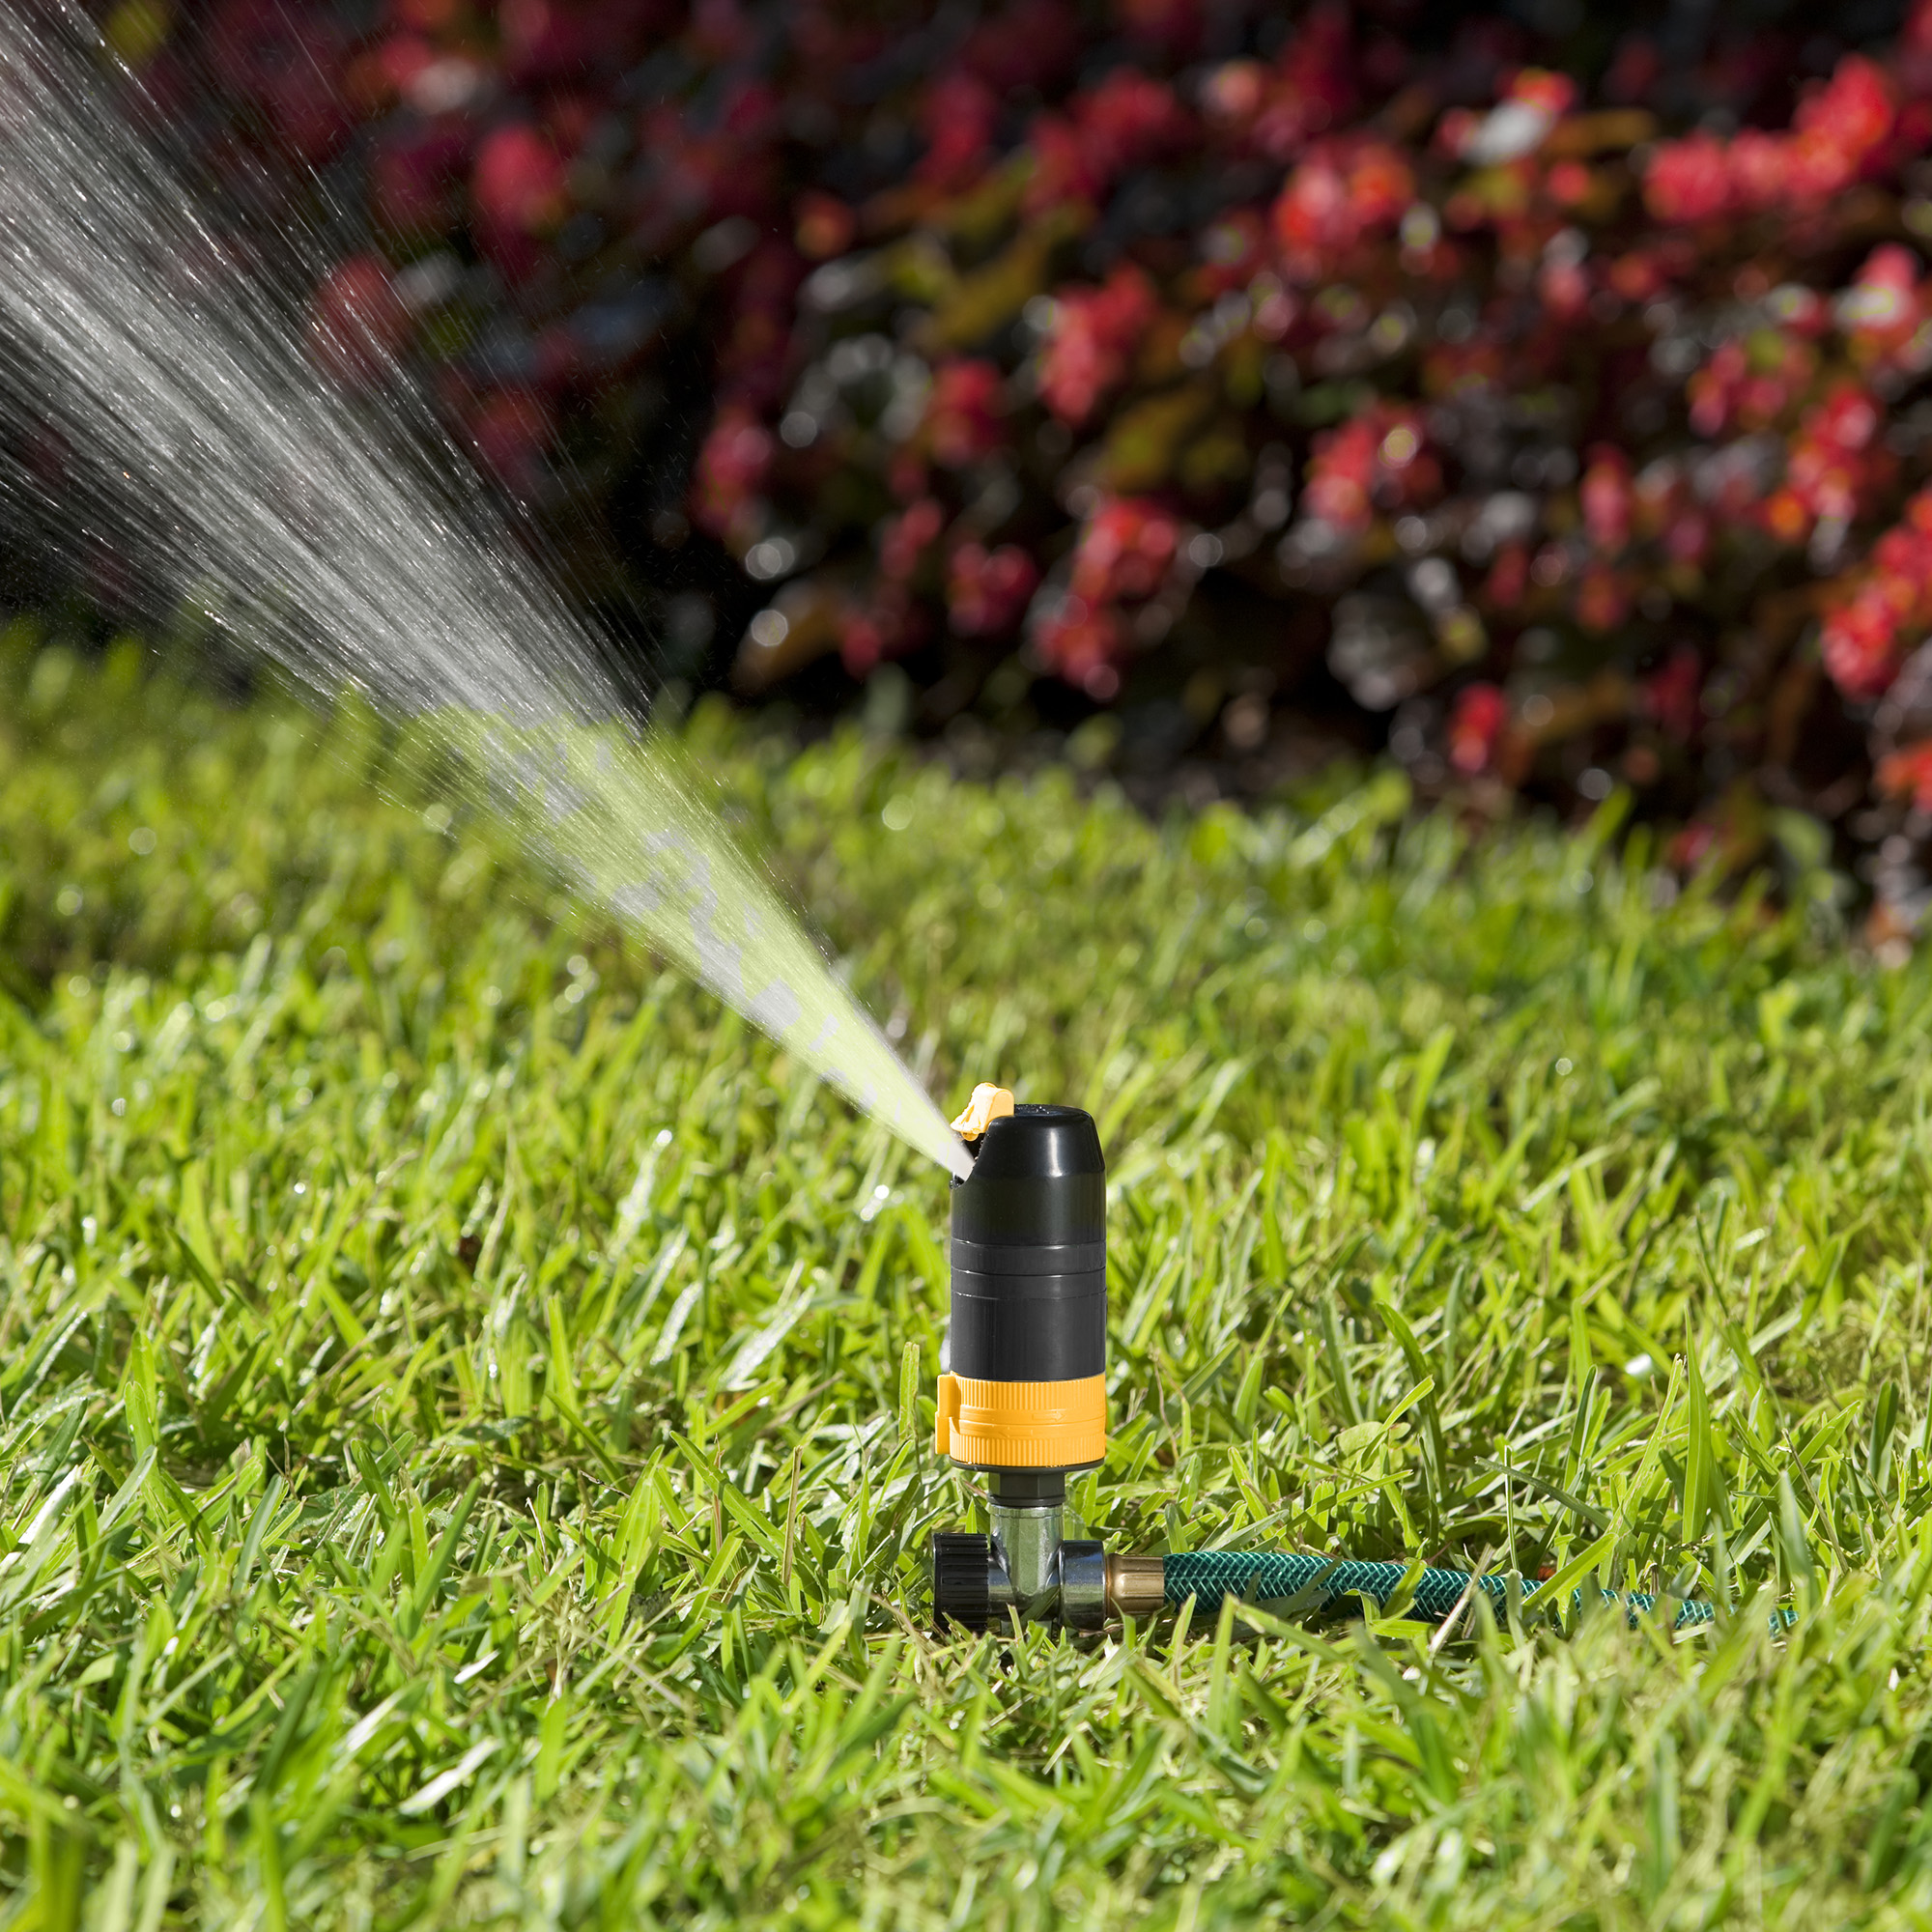 Healthy Spray Mob With Sprinkler And Water CanHealthy Spray Mob With  Sprinkler And Water Can 